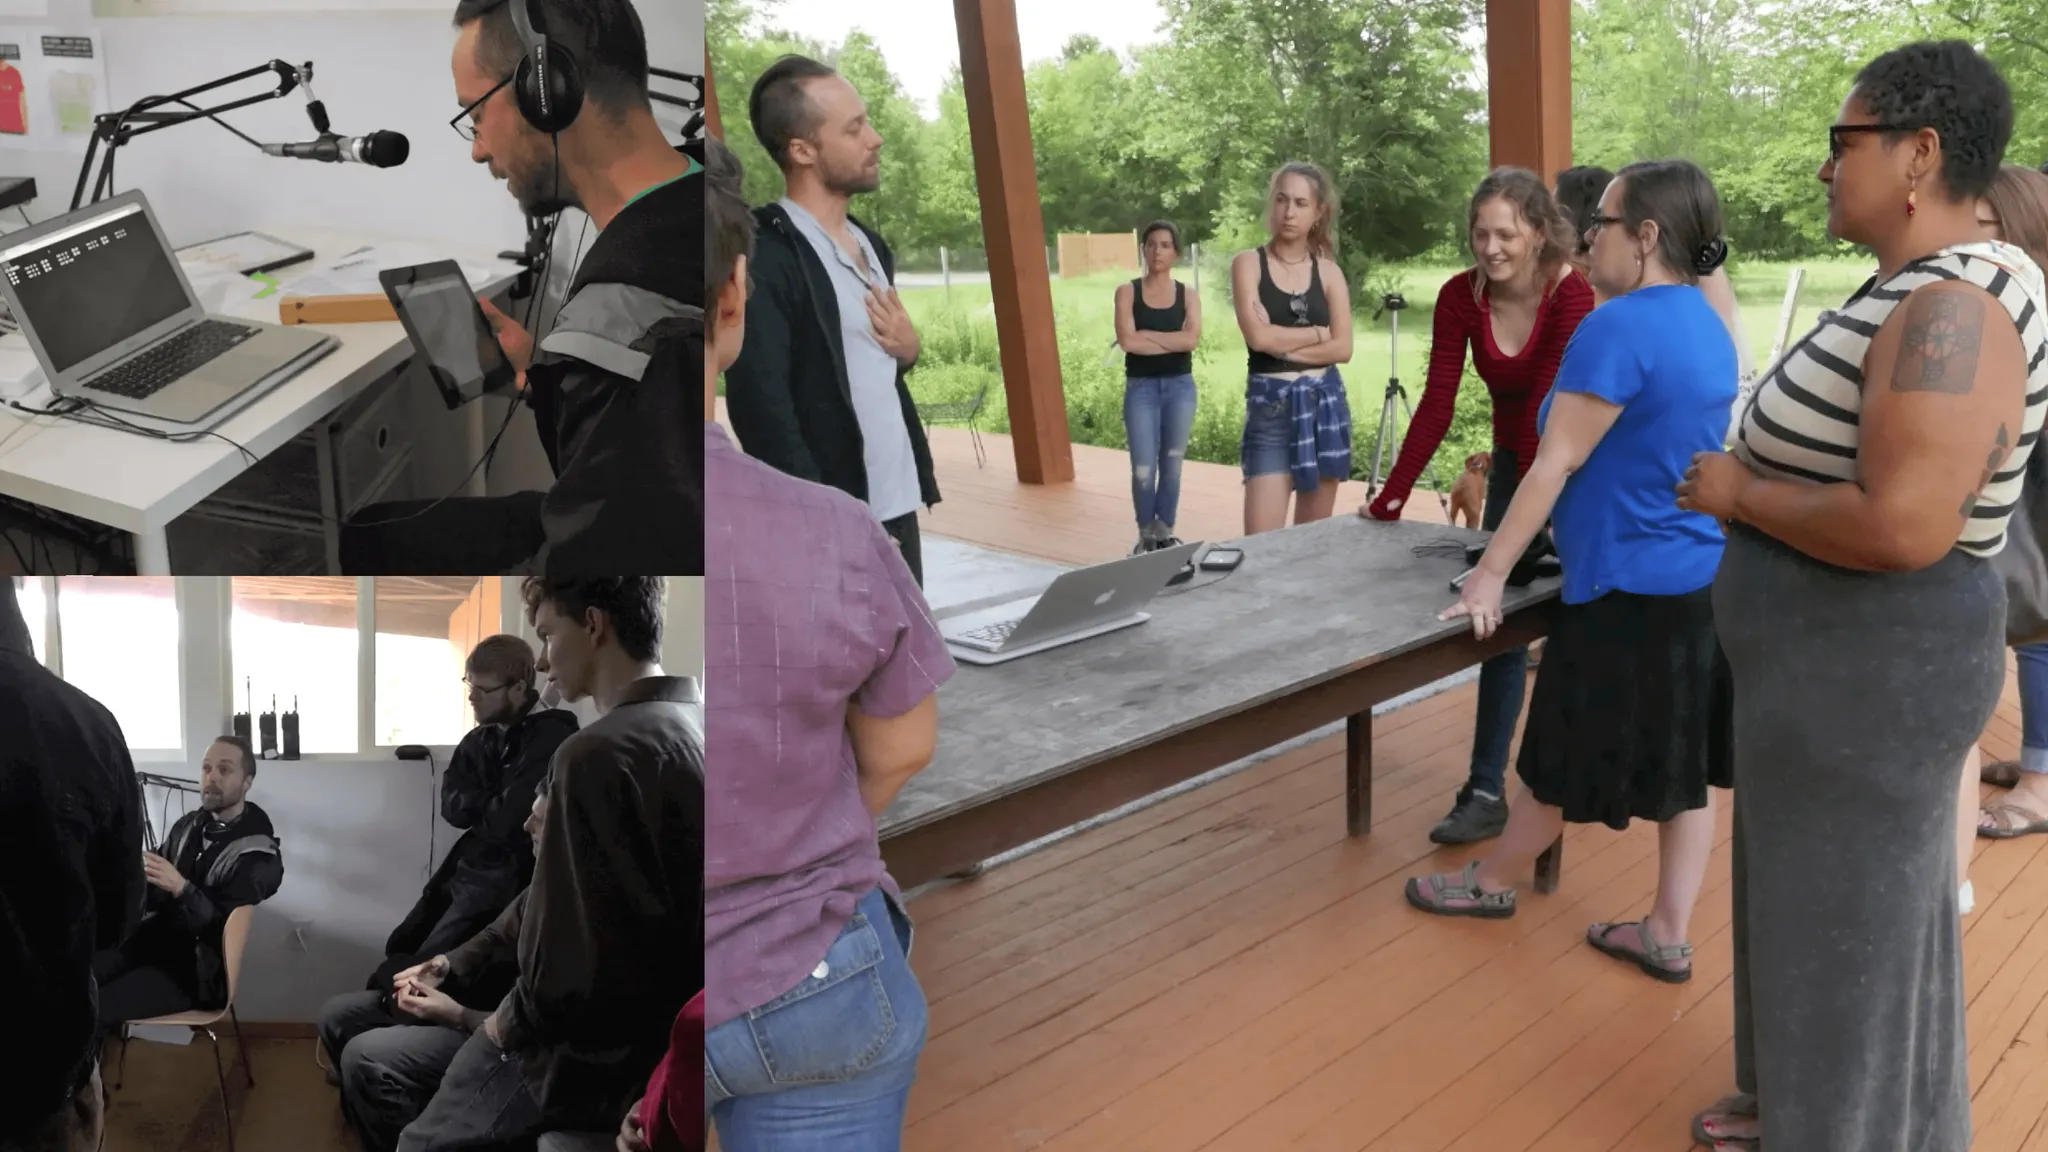 collage of photos, one of August from the side with headphones on, holding a tablet, and speaking into a mic, the other two of august speaking to onlookers.